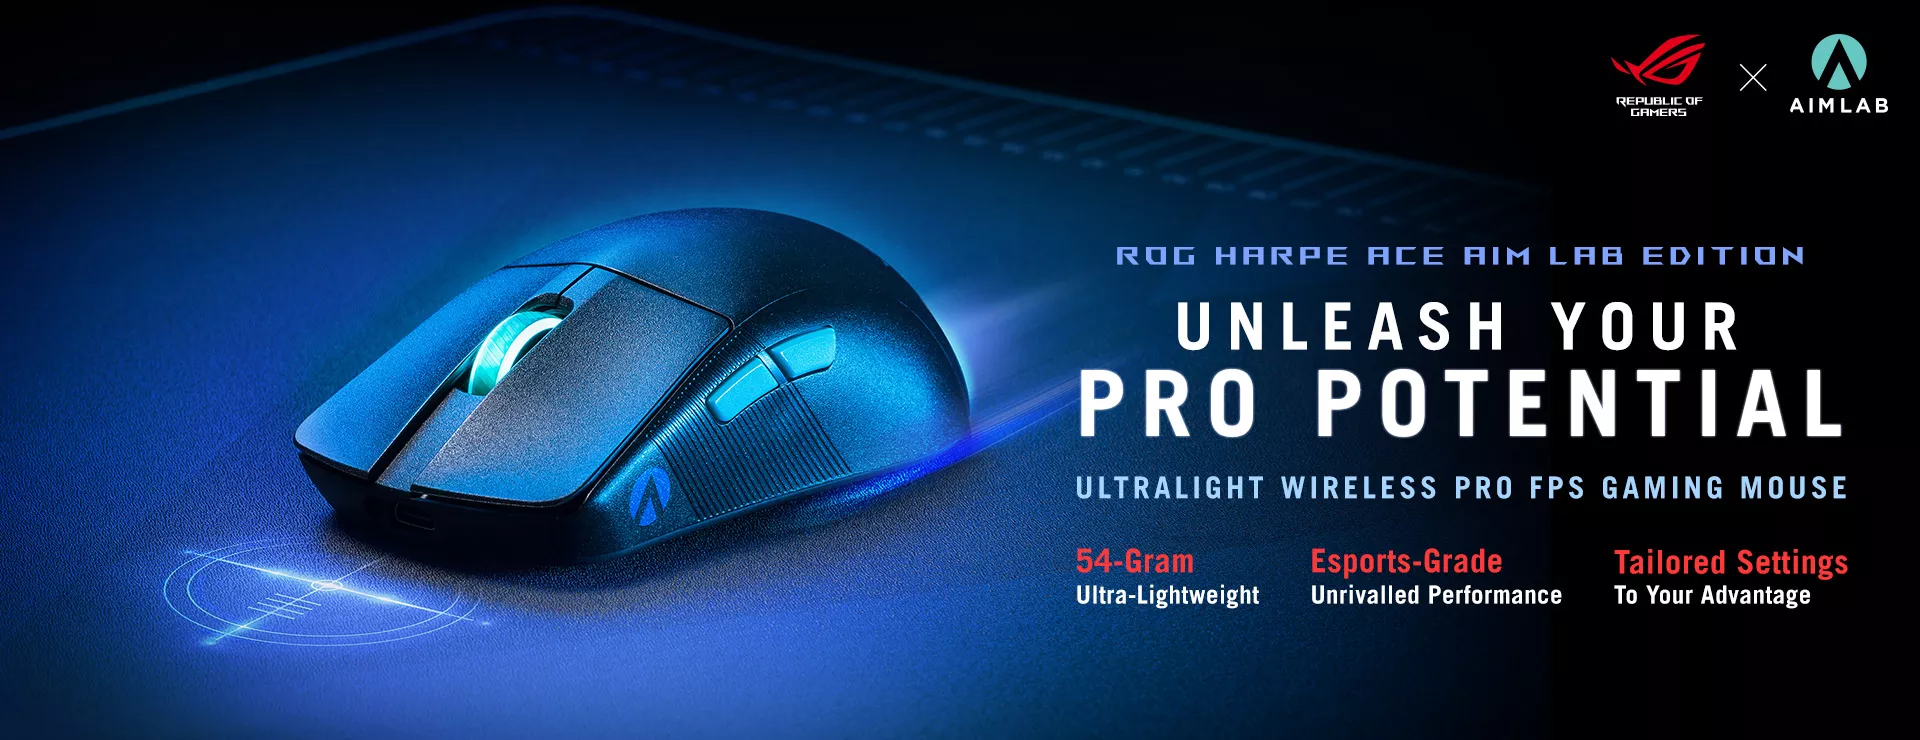 Image shows the ROG Harpe Ace Aim Lab Edition mouse. Please click to learn more